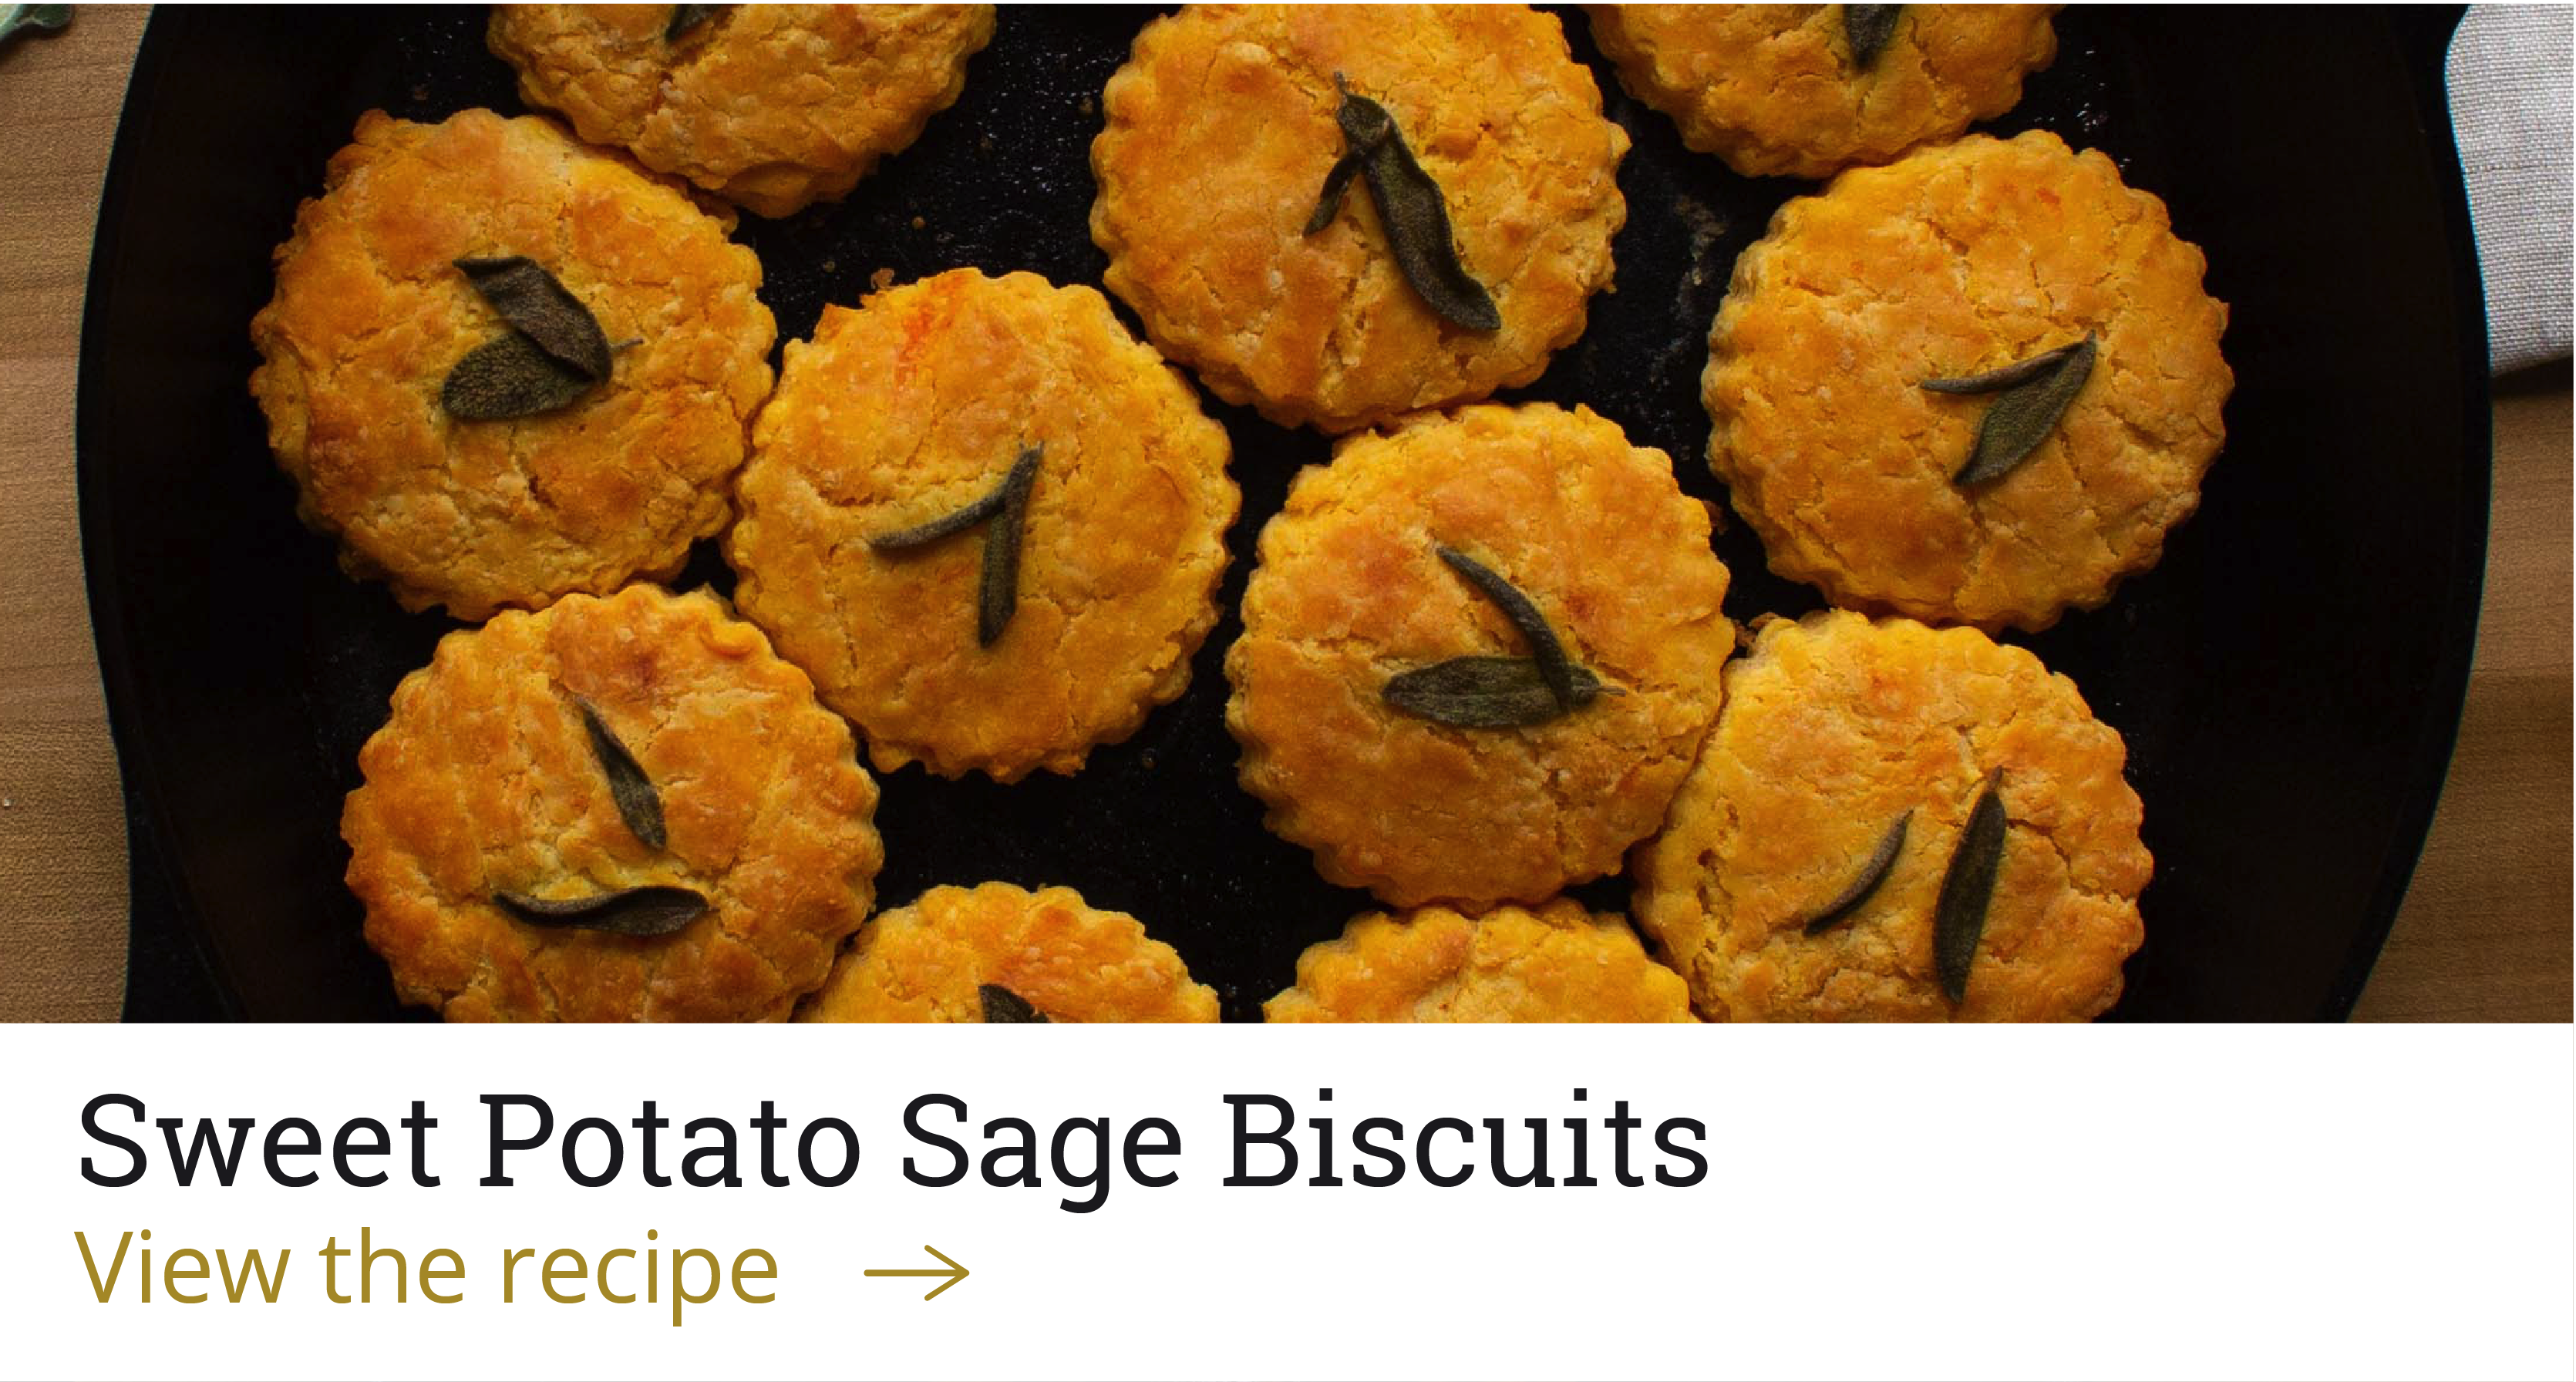 Sweet Potato Sage Biscuits [View the recipe ?]